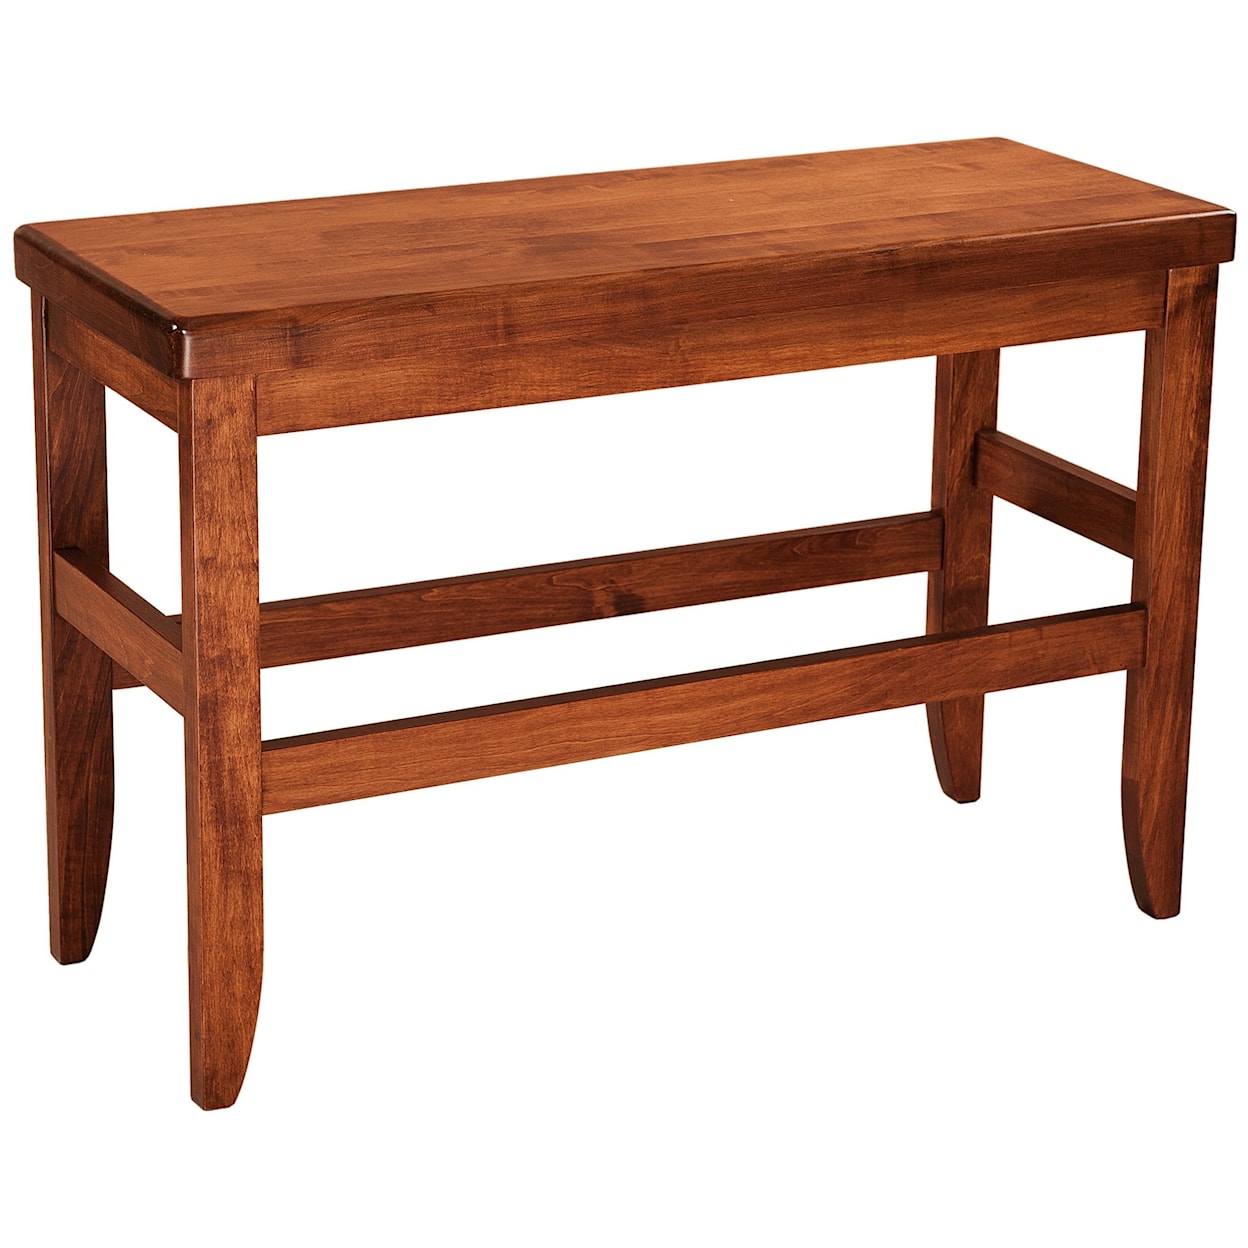 F&N Woodworking Clifton Bench 30"h x 36"w - Wood Seat